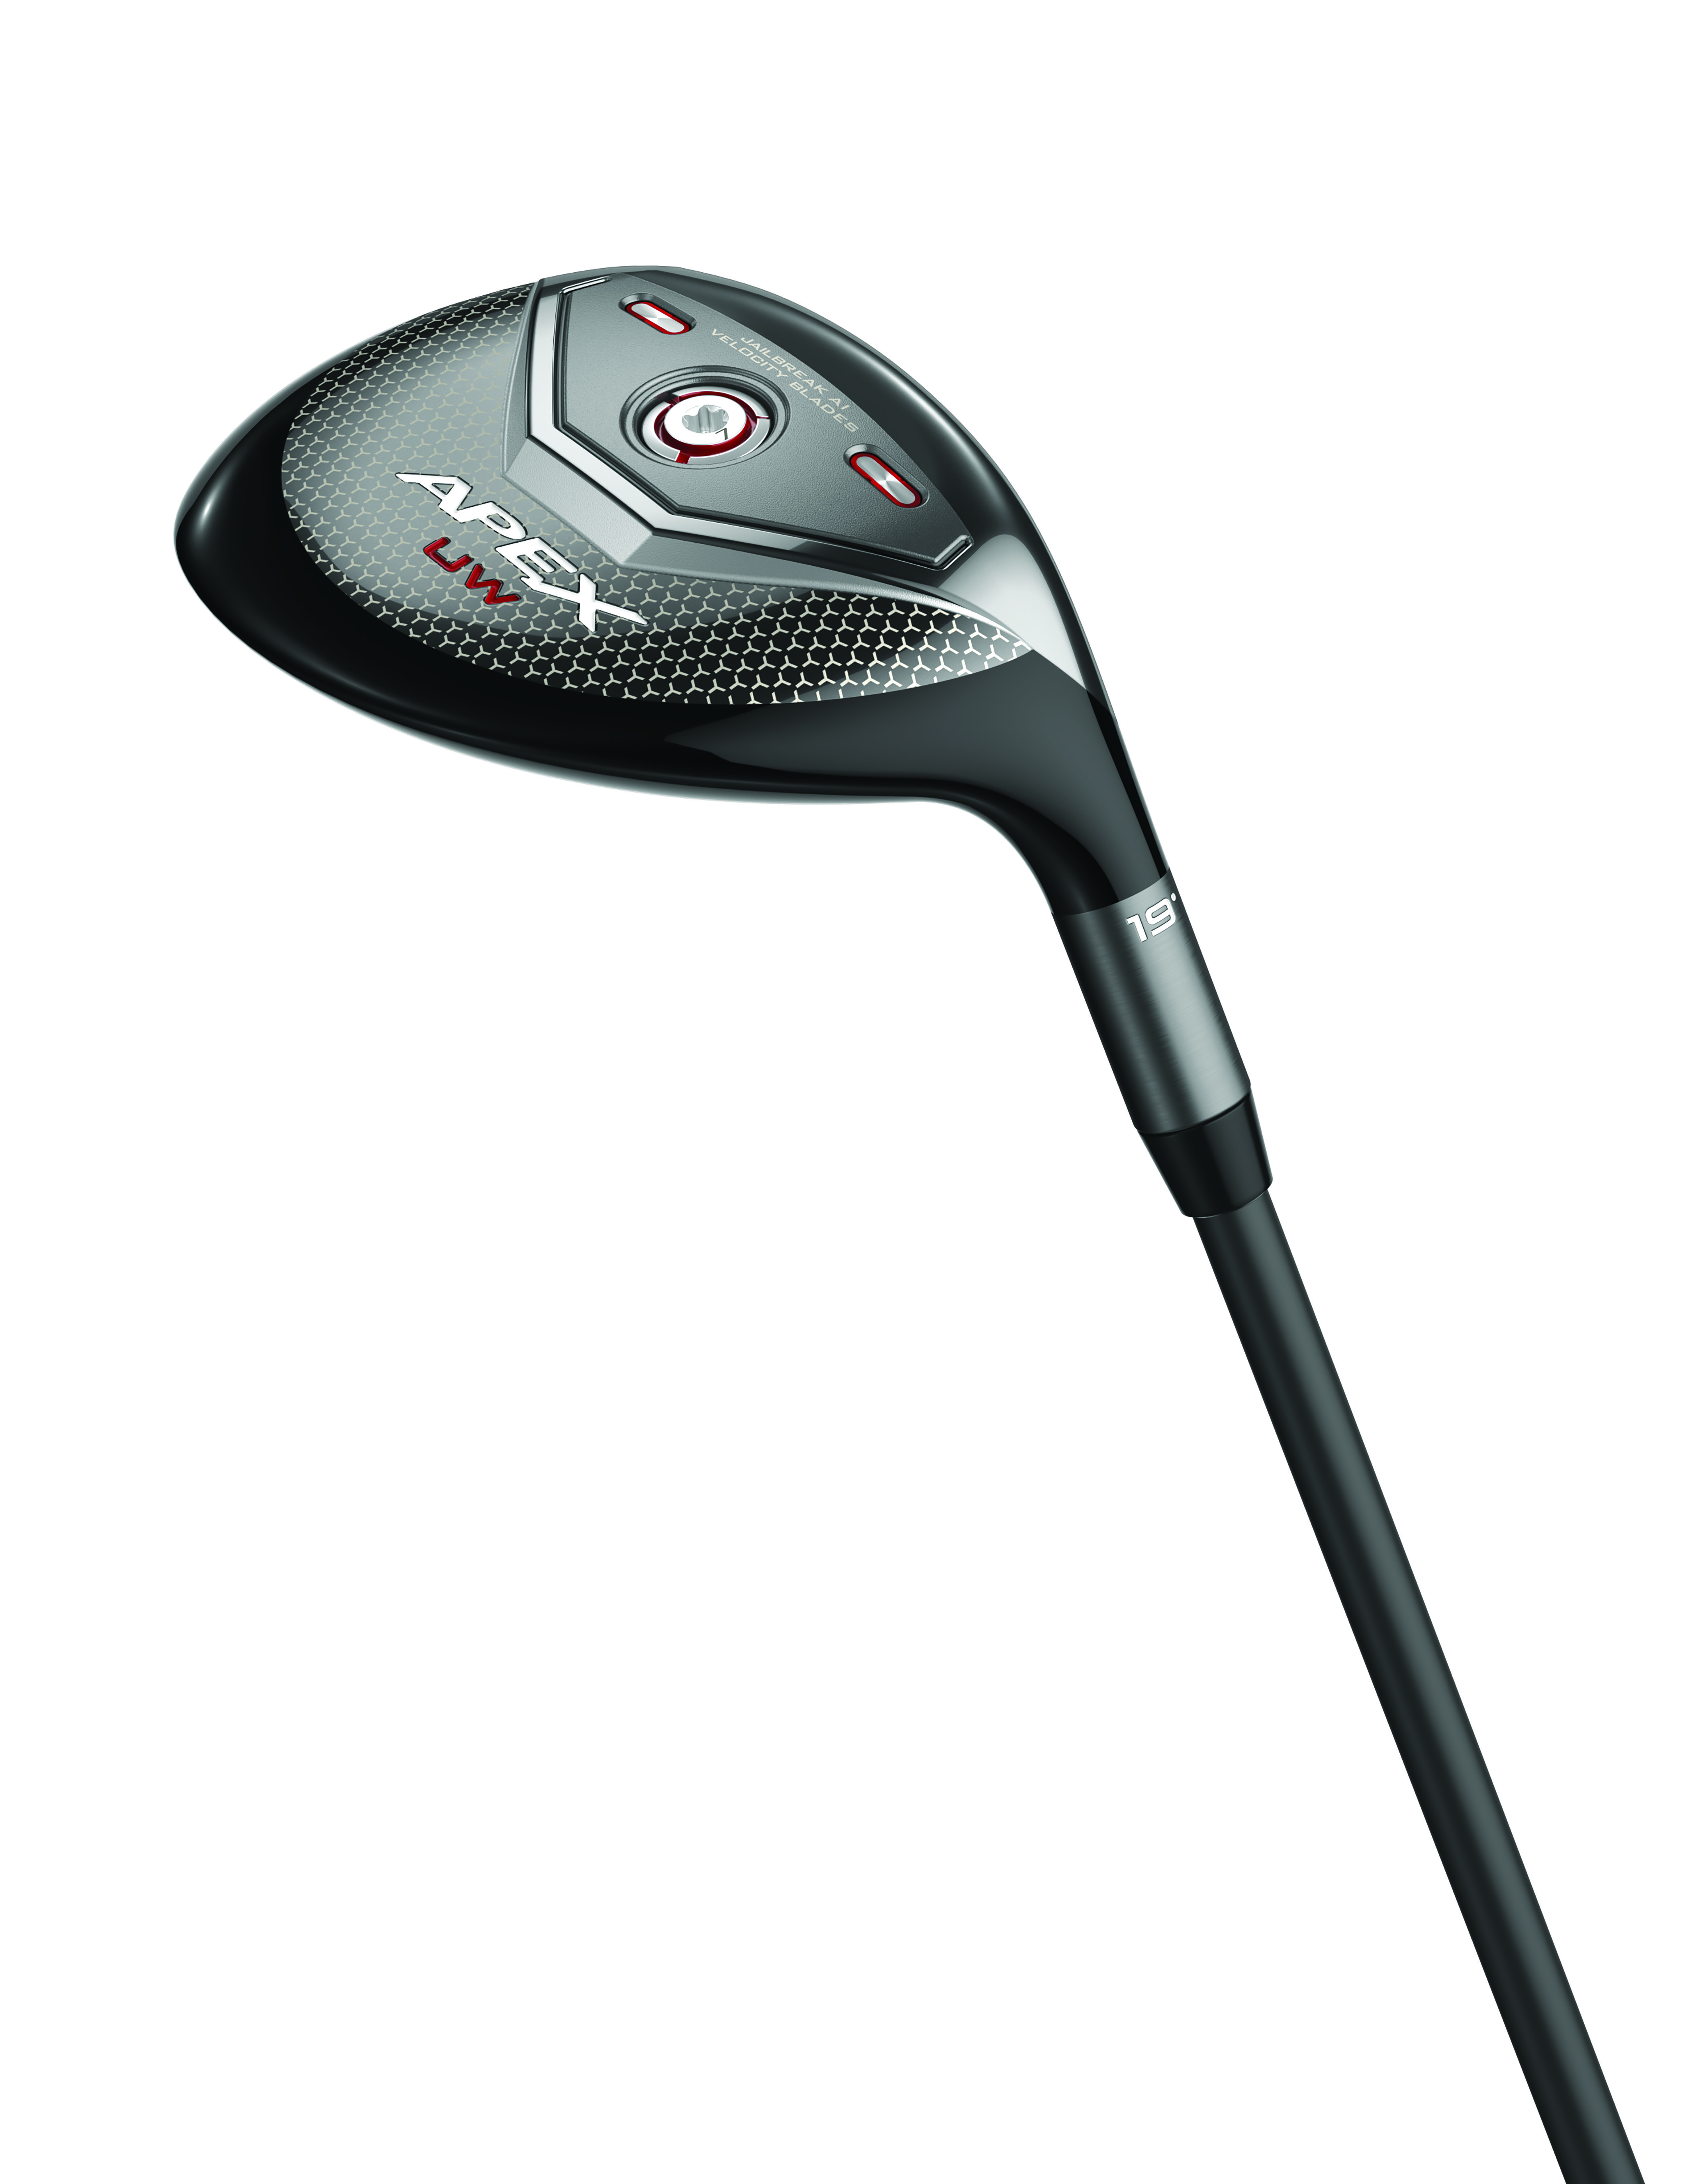 Callaway's latest hybrid combines the best of fairway woods and